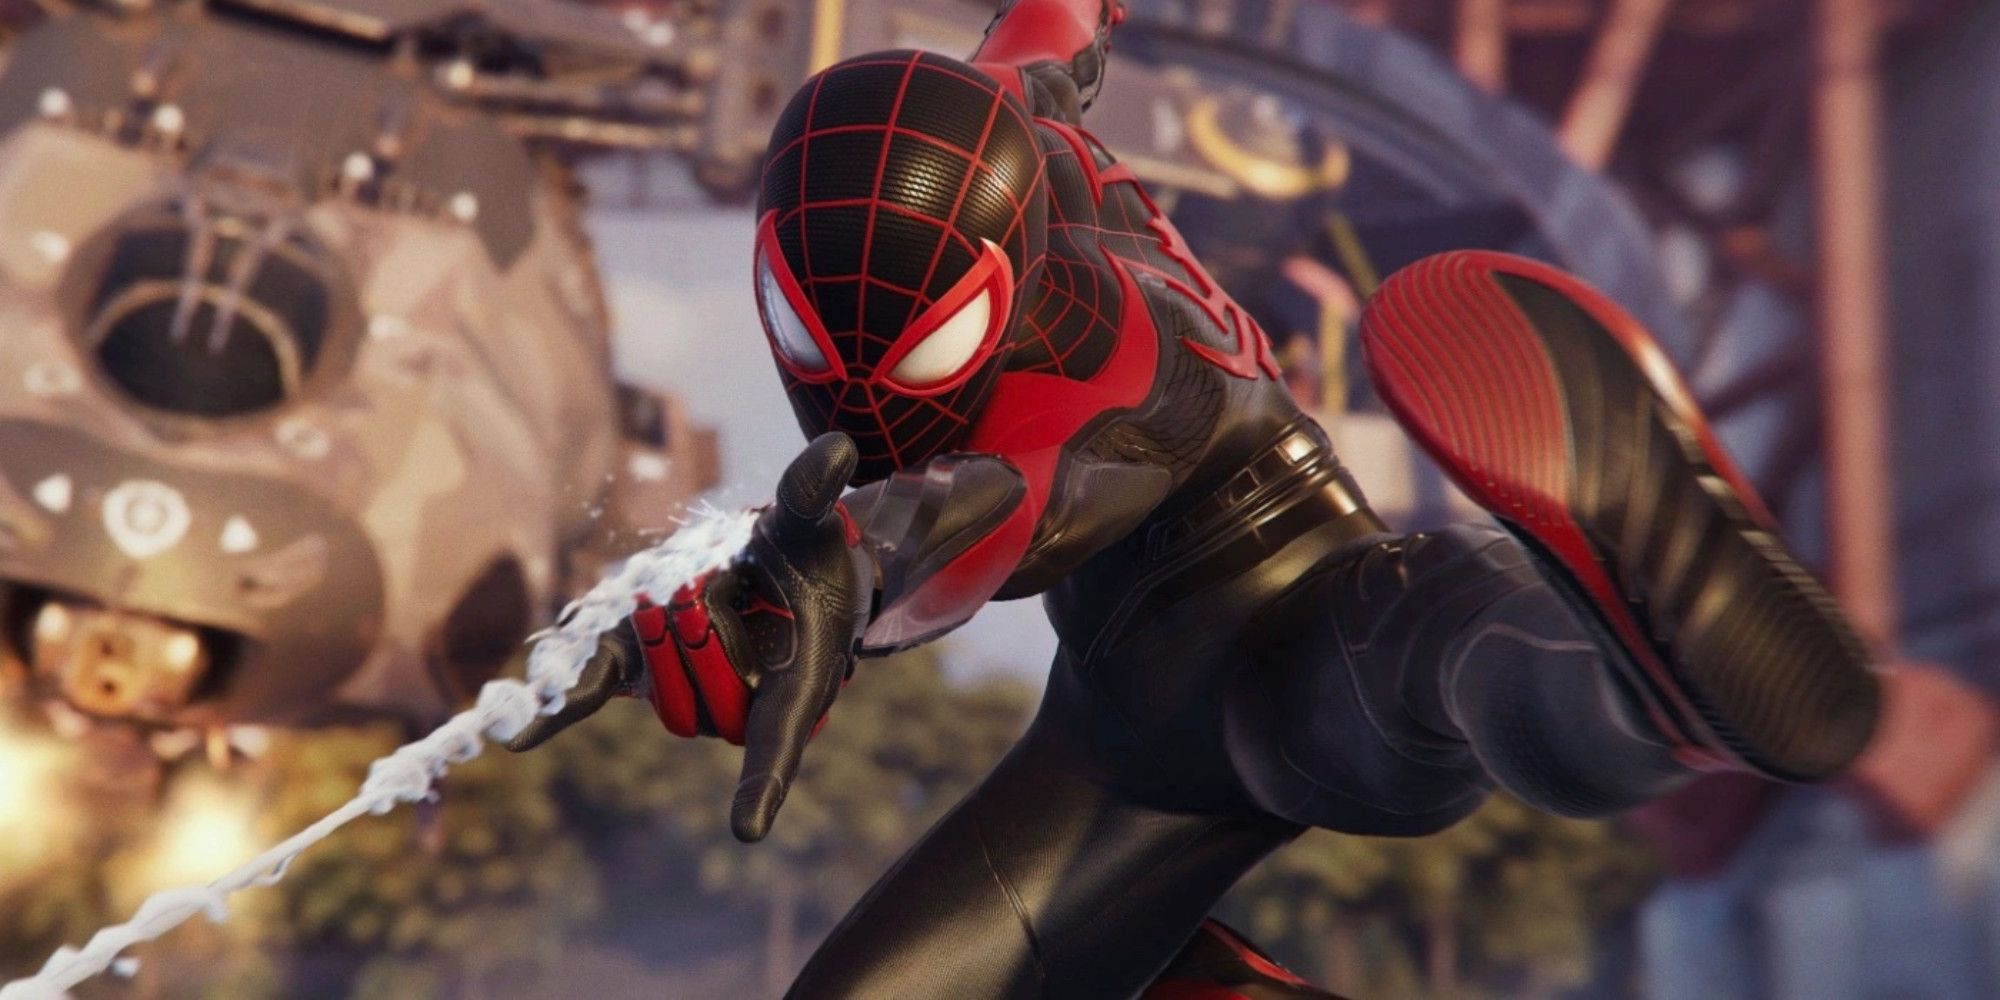 Miles Morales firing a web towards the camera in Marvel's Spider-Man 2